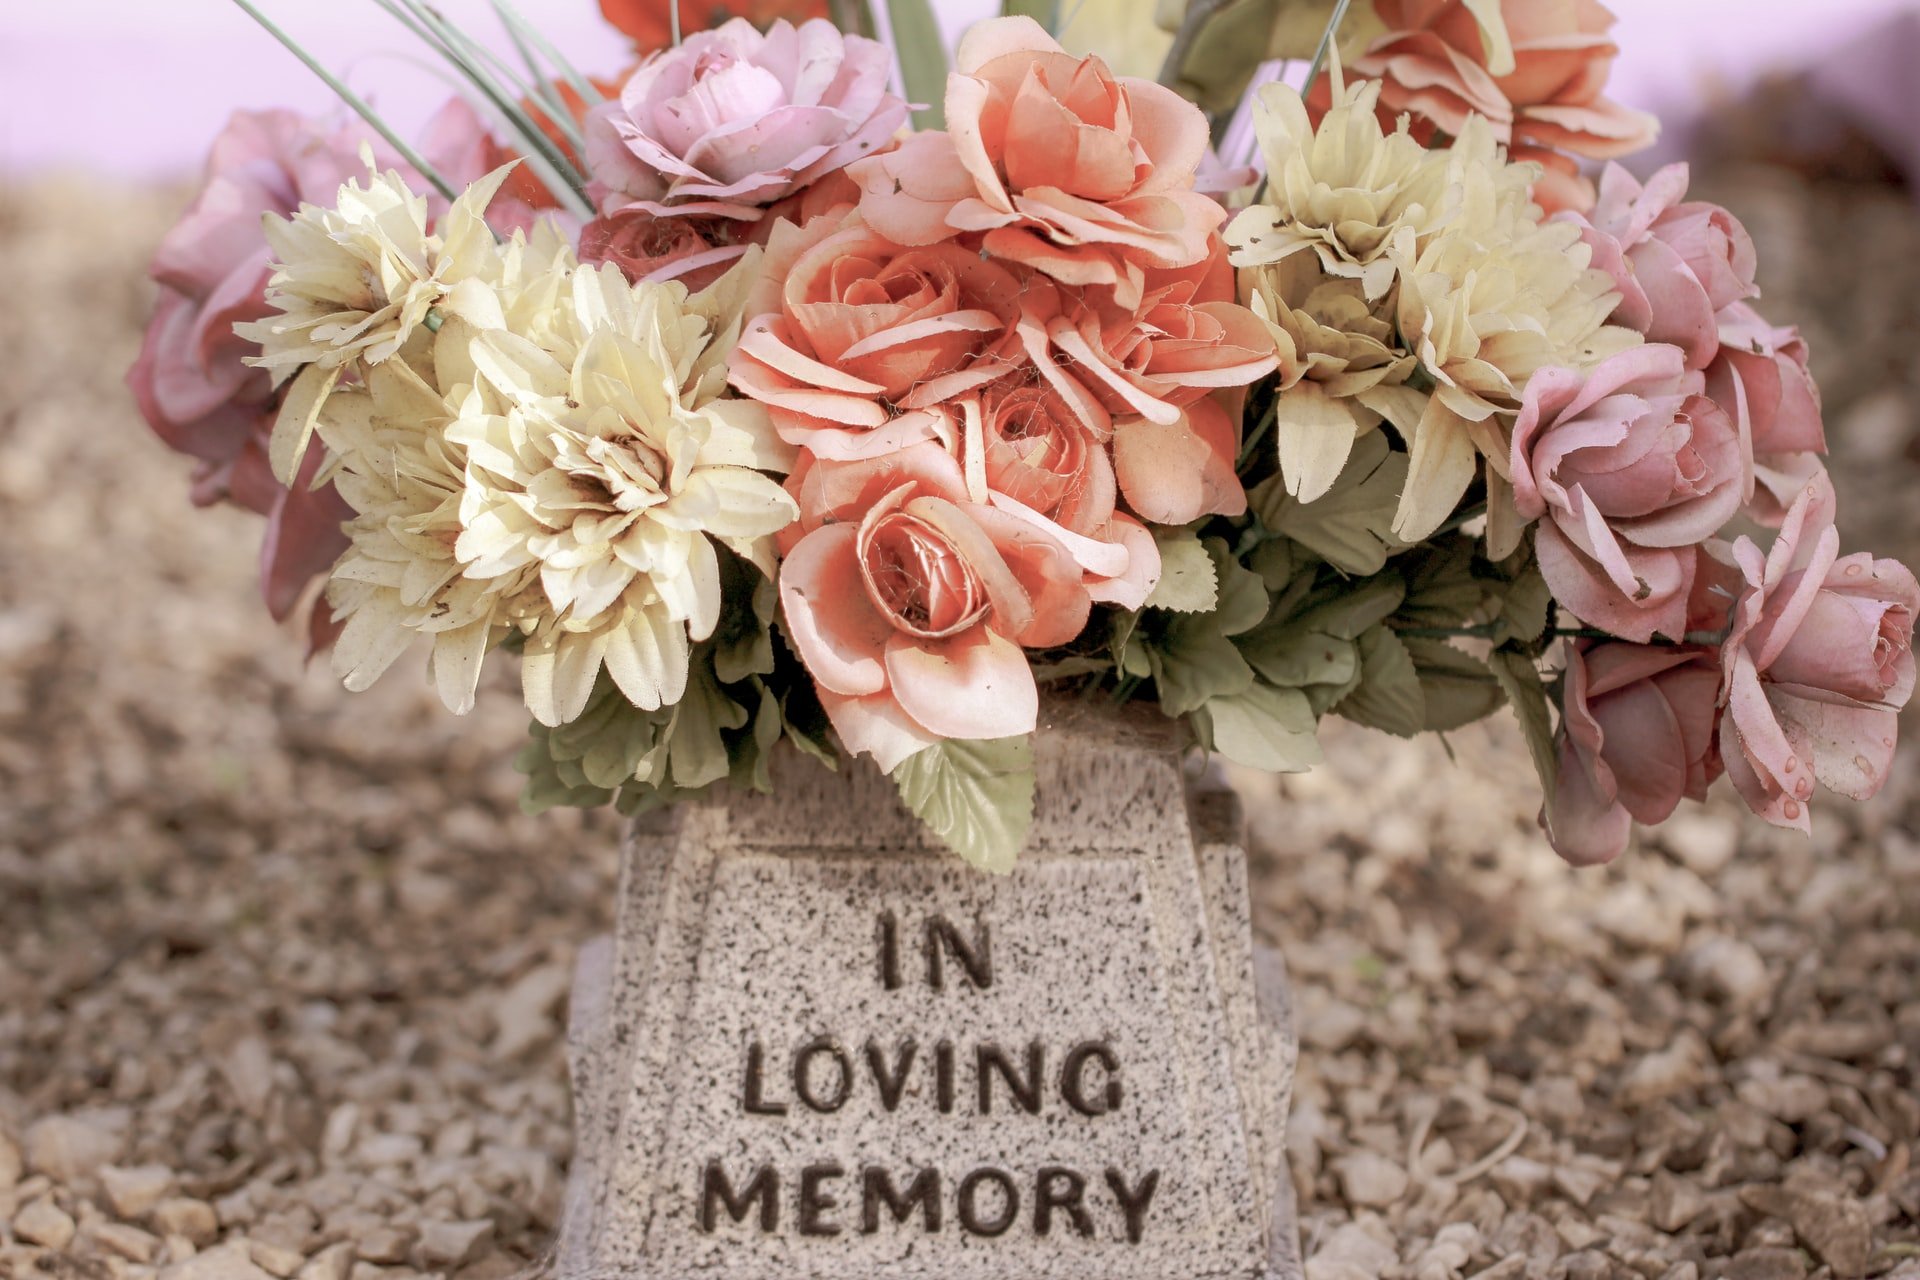 OP left a gift and some flowers at her mother's grave | Source: Unsplash